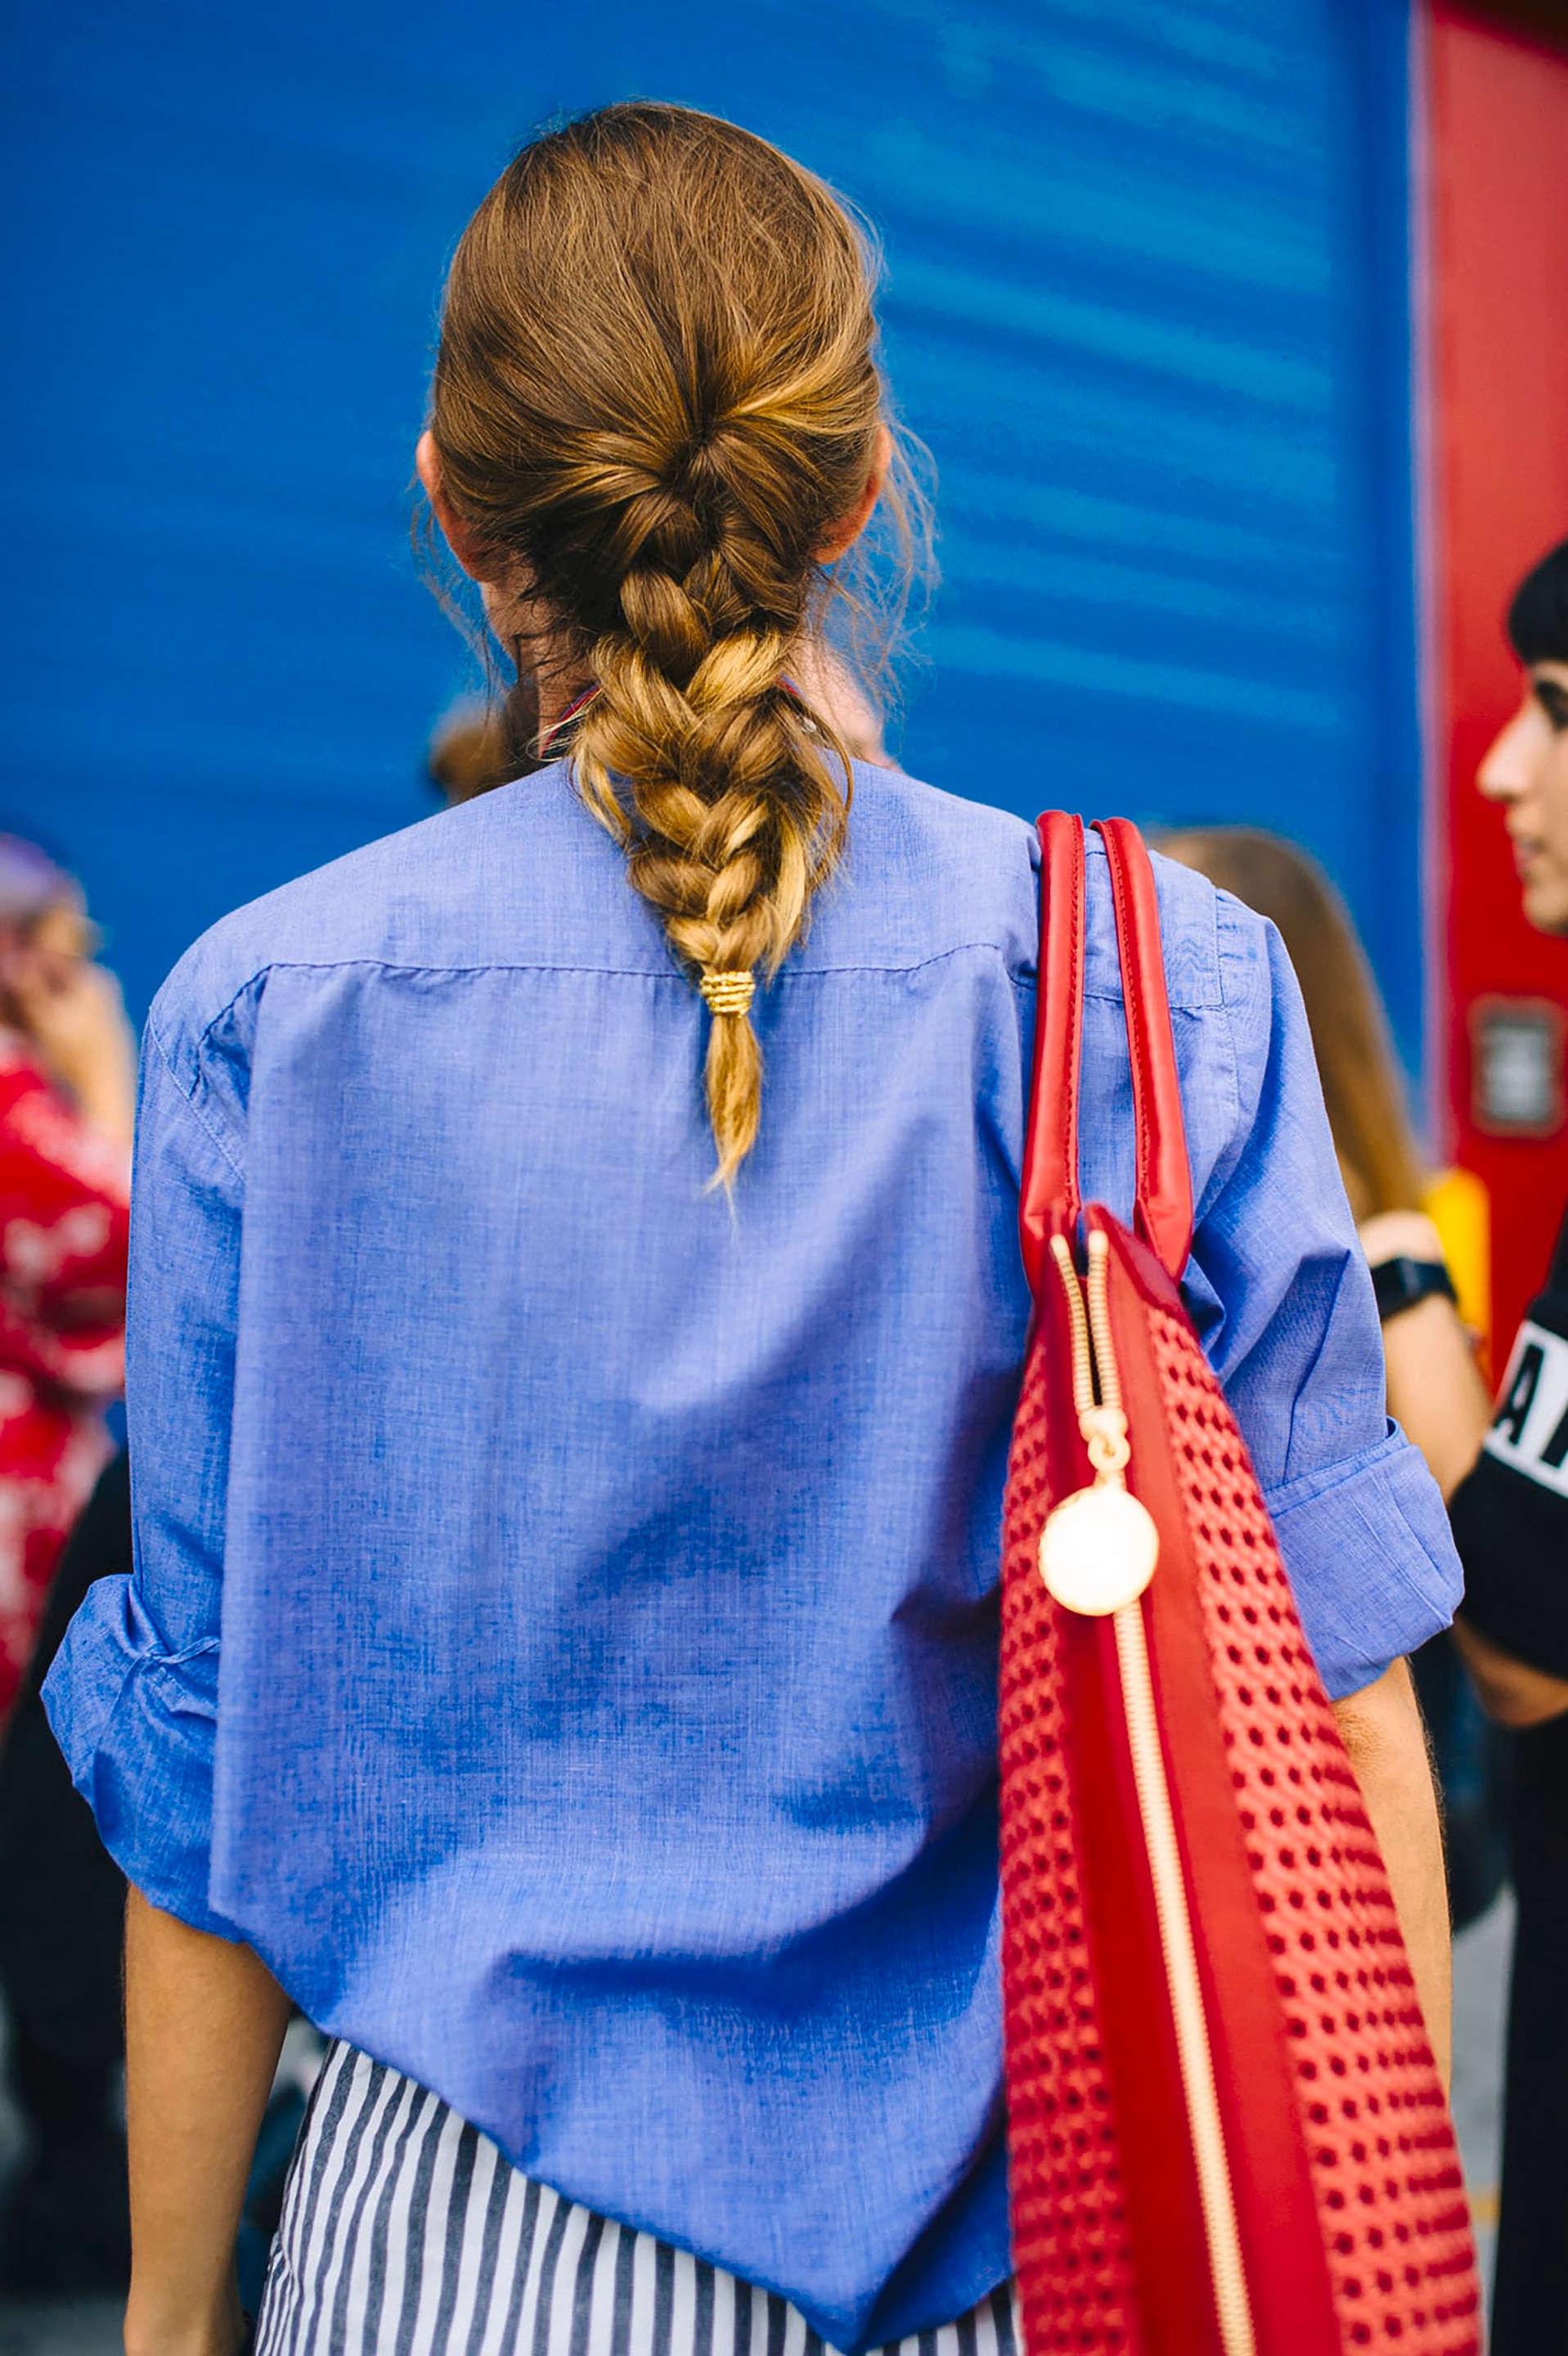 A woman standing in the street wearing a blue shirt with her hair in a thick braid